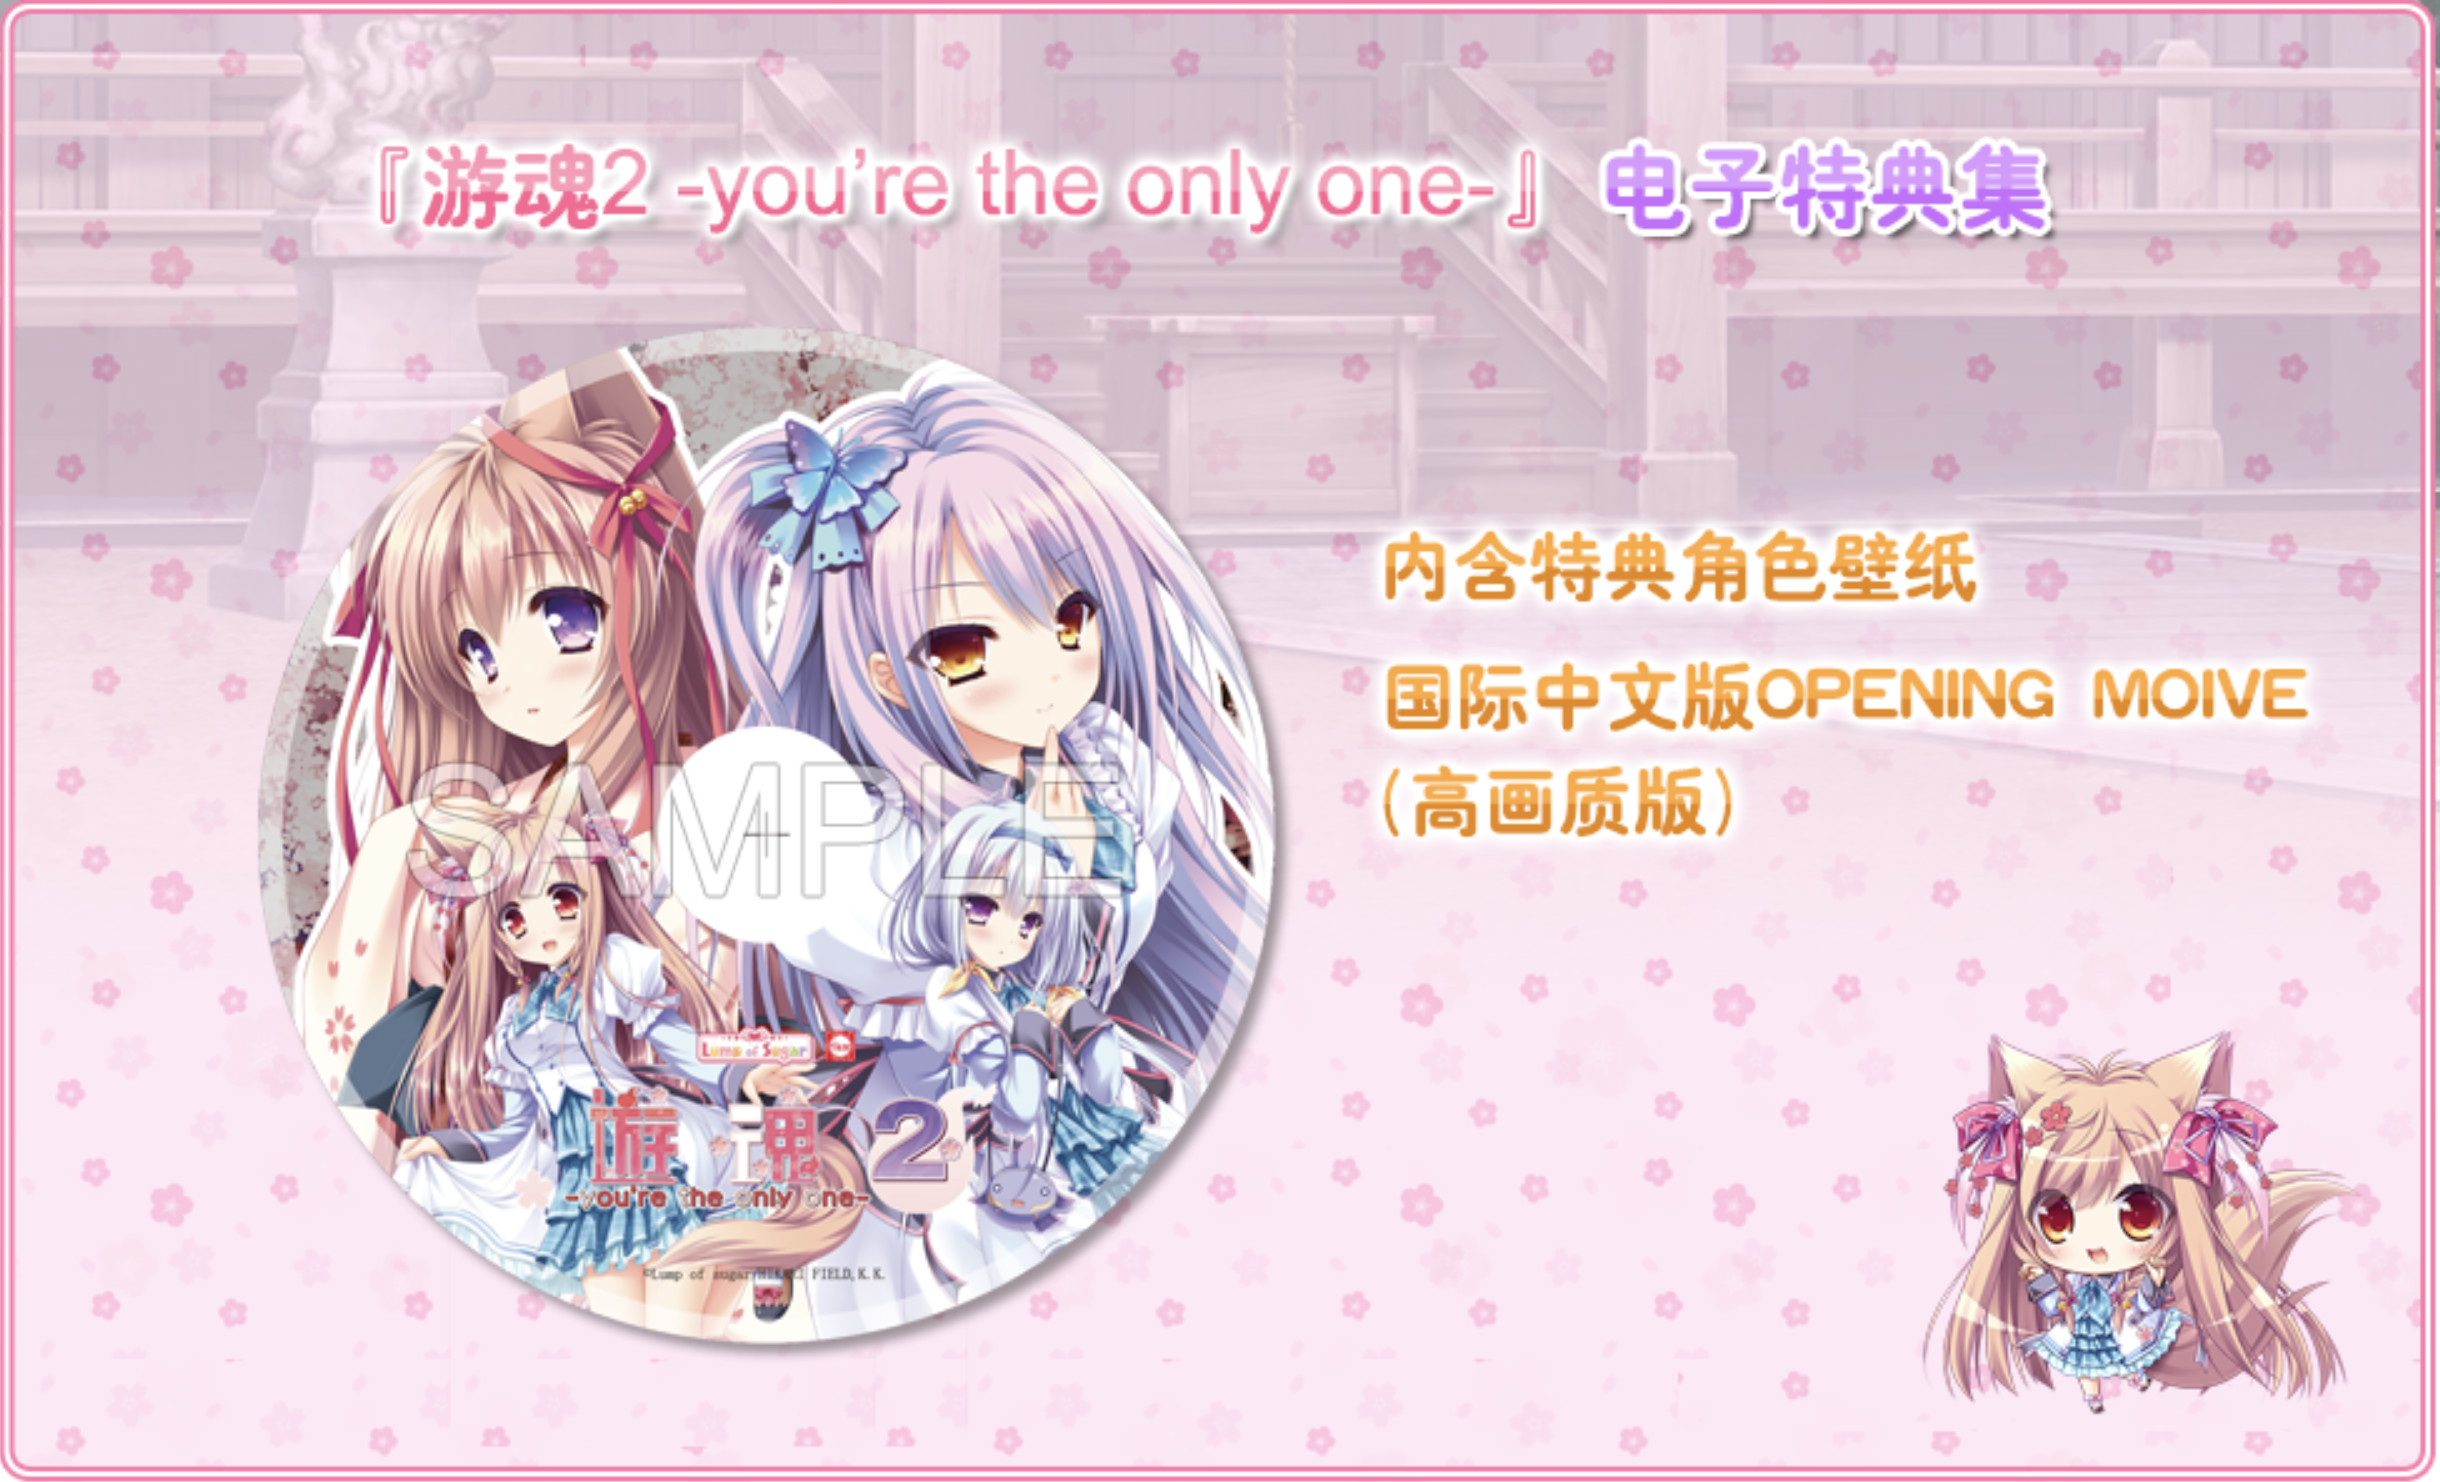 Tayutama 2 You Re The Only One 游魂2 You Re The Only One 周边特典版详情公布 Steam News